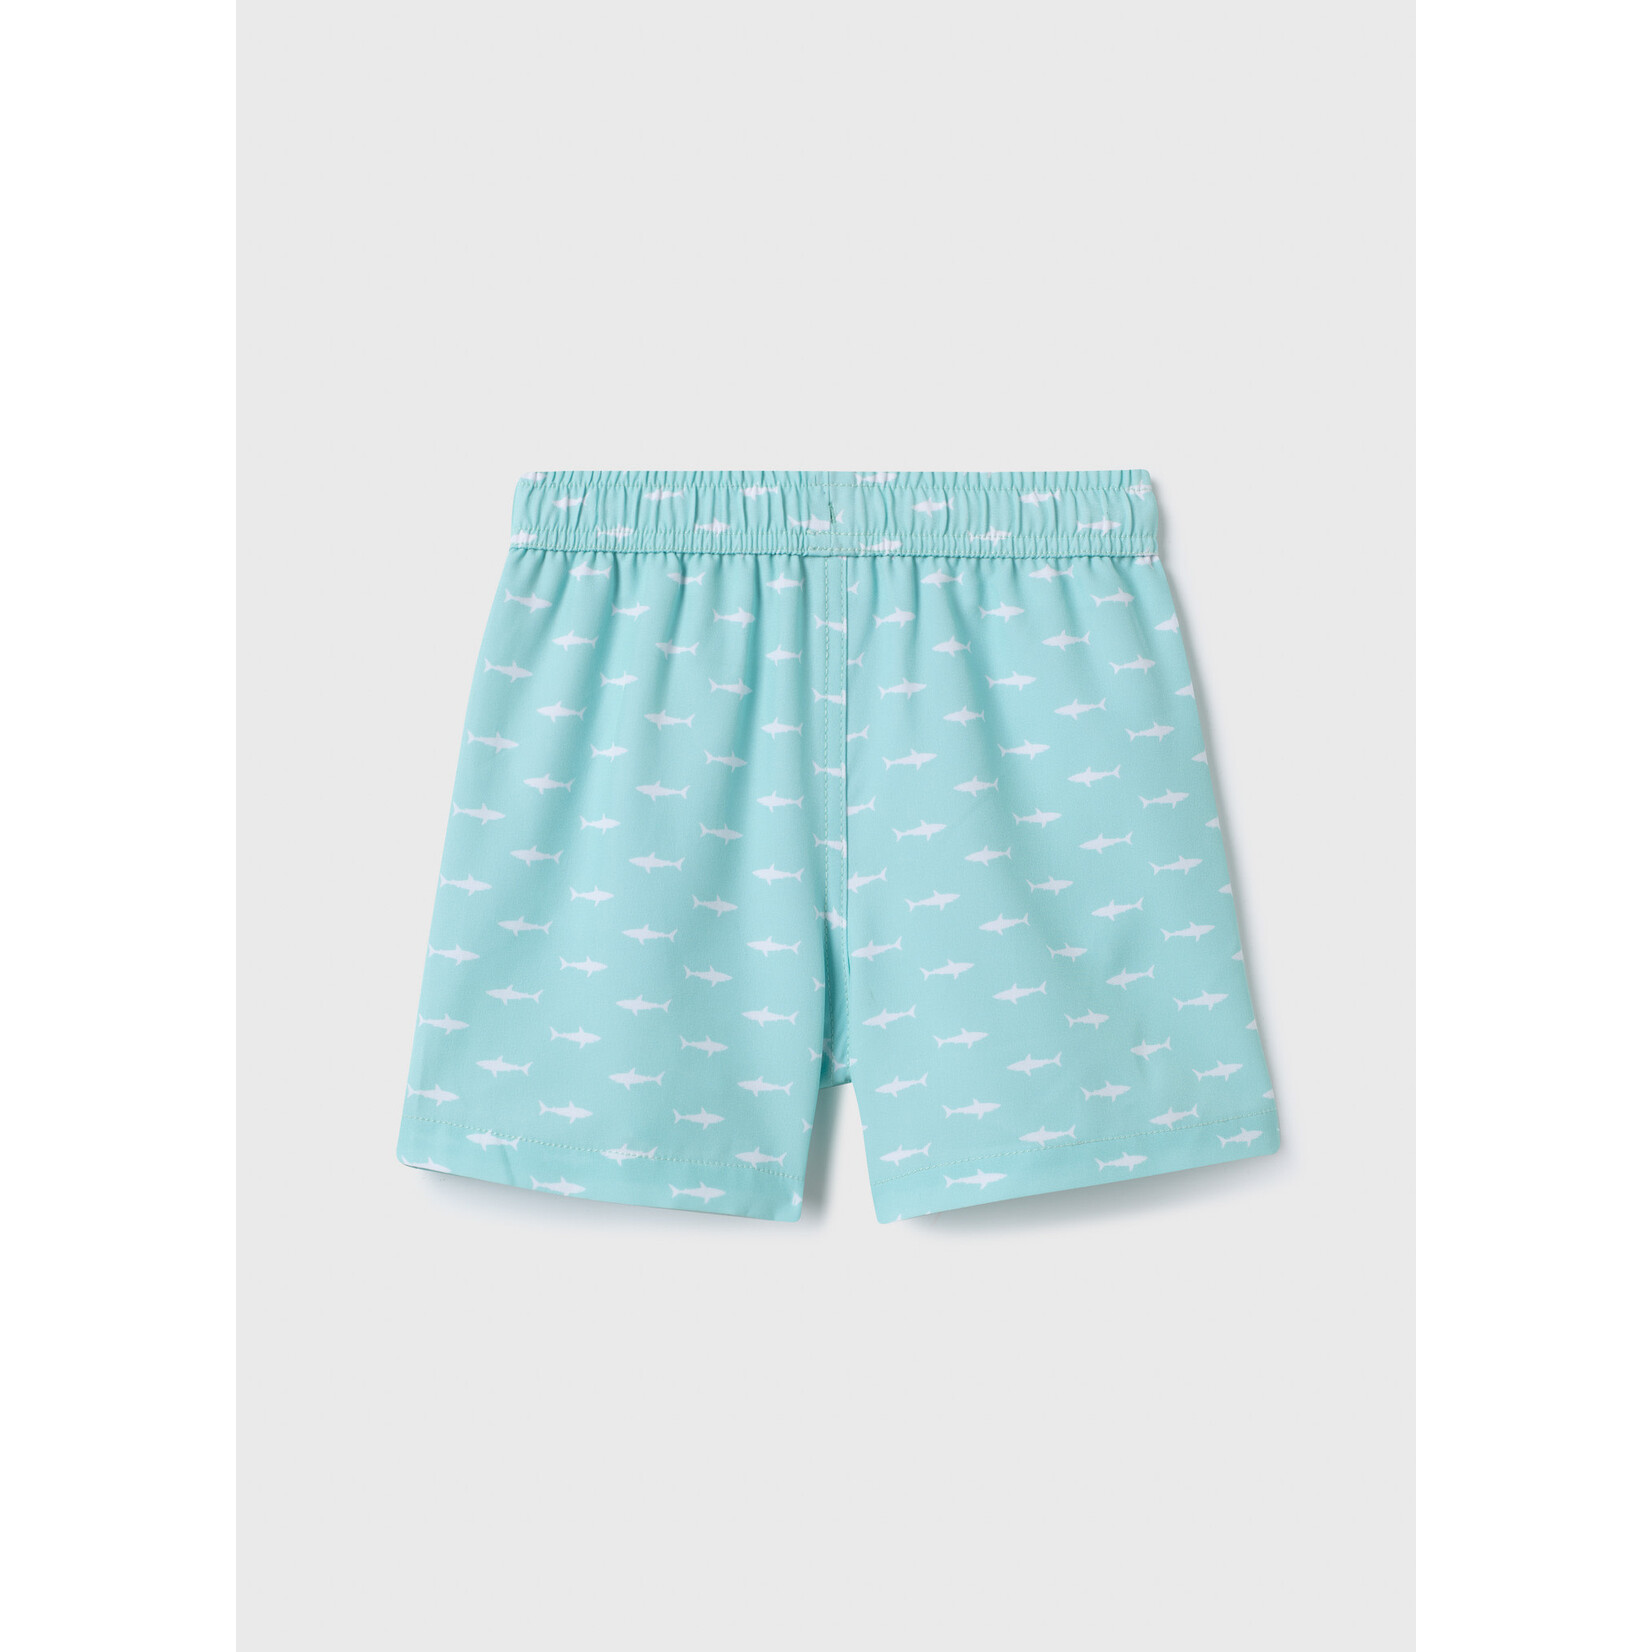 Northcoast NORTHCOAST -  Light turquoise swimming shorts with sharks silhouettes